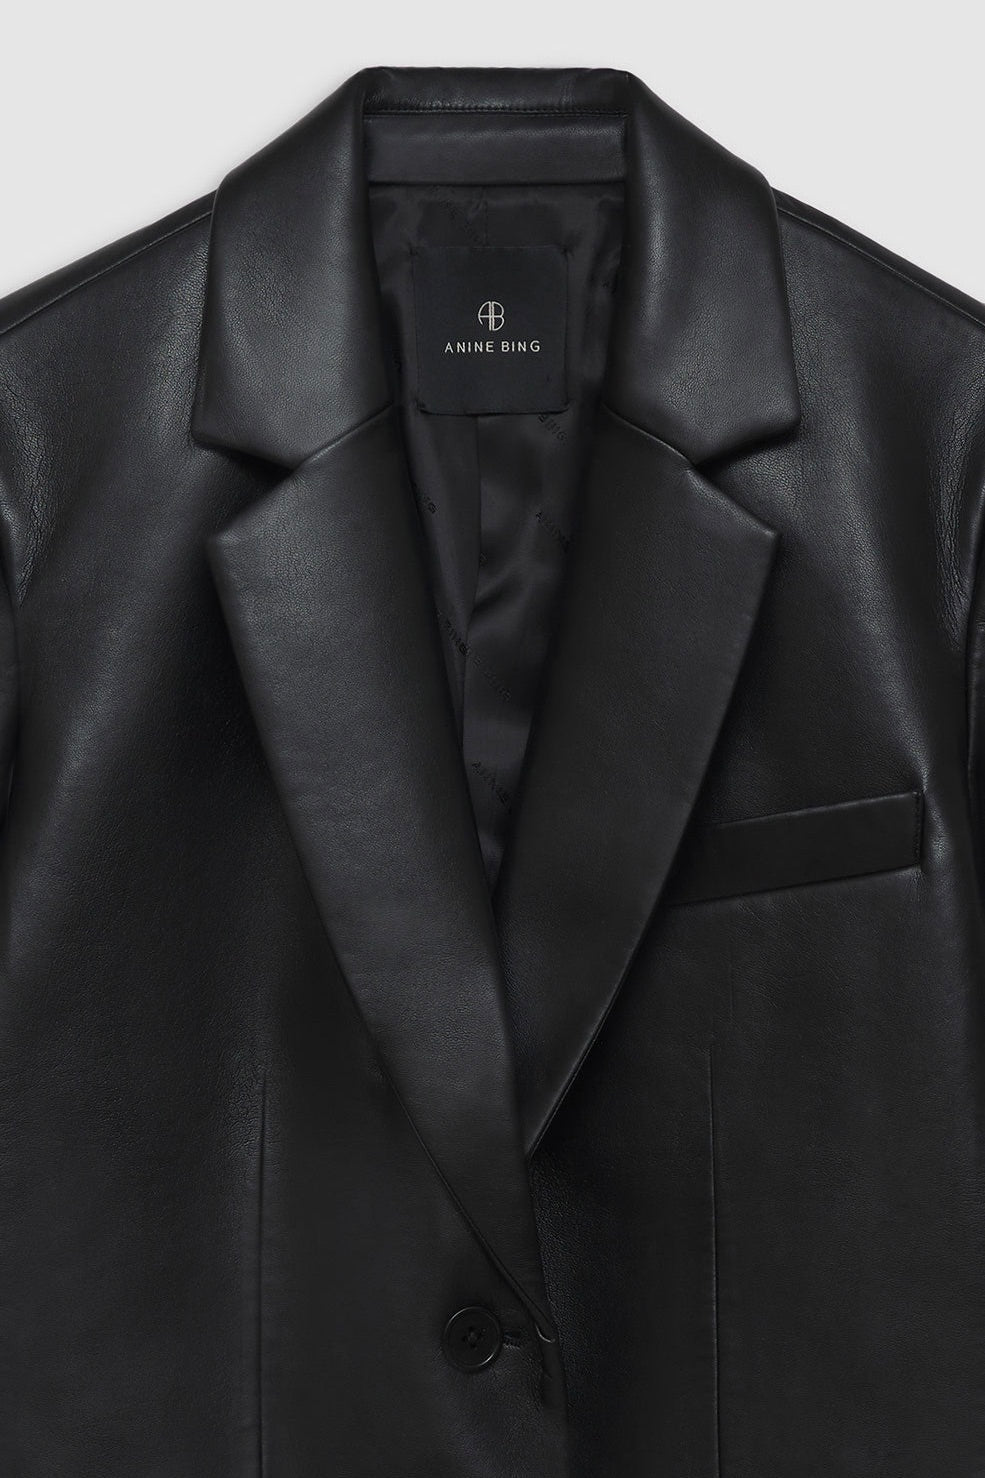 ANINE BING - CLASSIC BLAZER - BLACK RECYCLED LEATHER - Dale